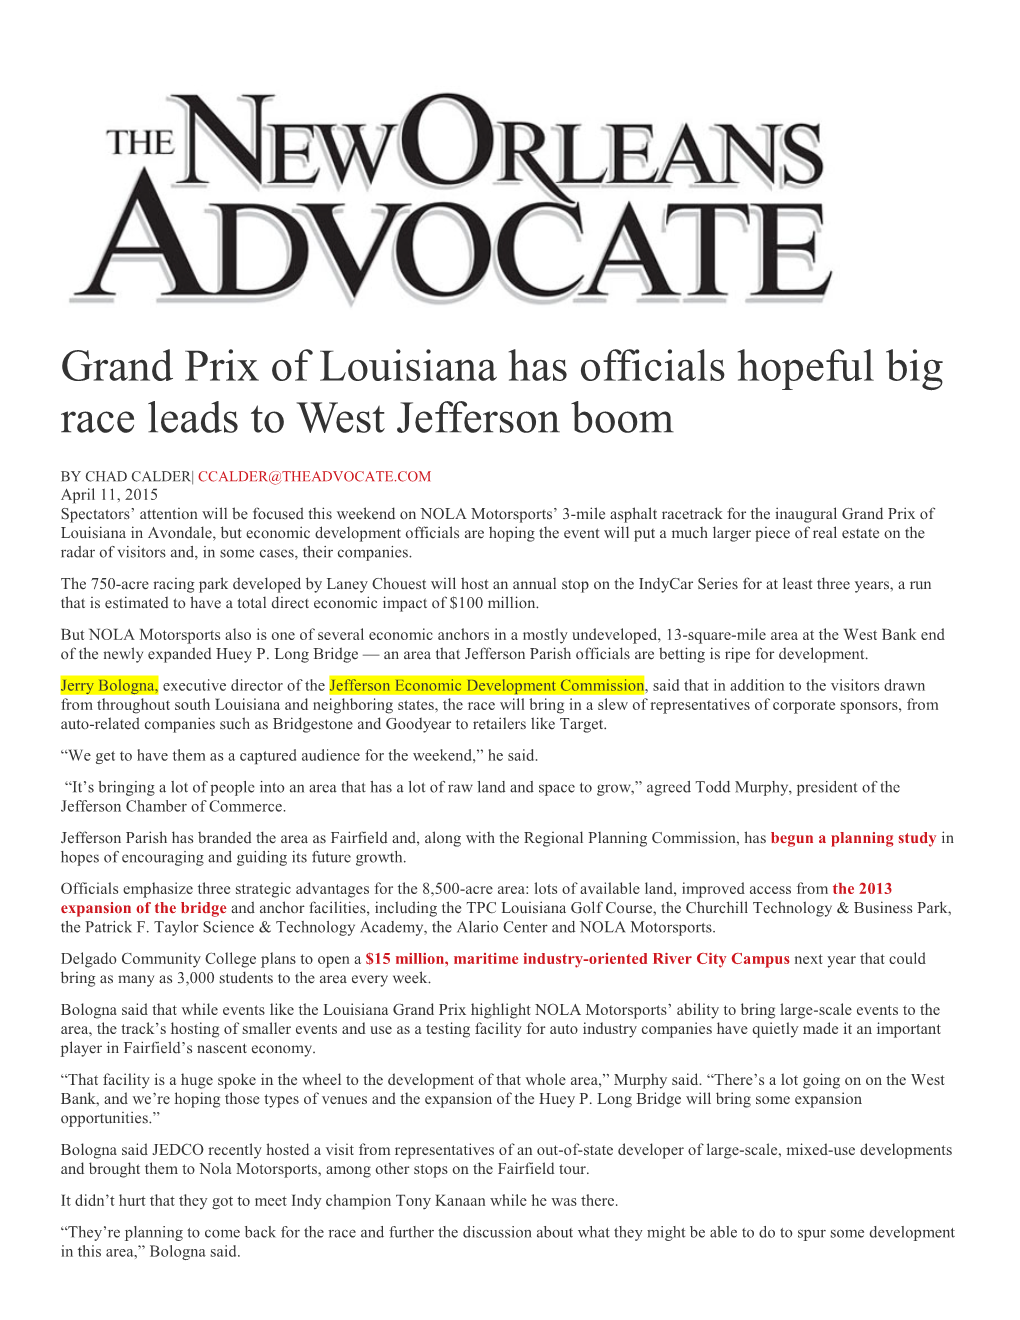 Grand Prix of Louisiana Has Officials Hopeful Big Race Leads to West Jefferson Boom